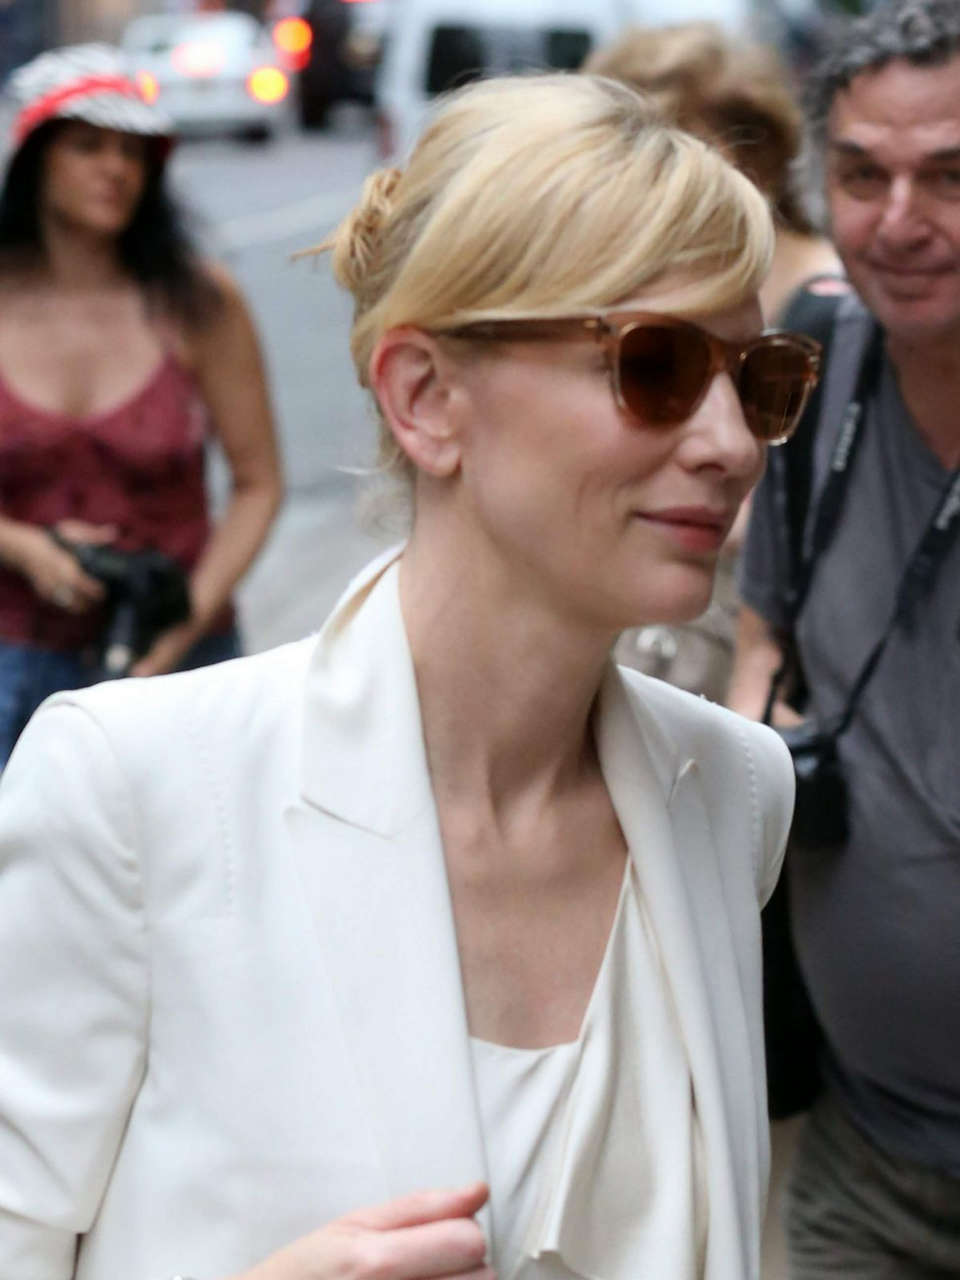 Cate Blanchett Out About New York